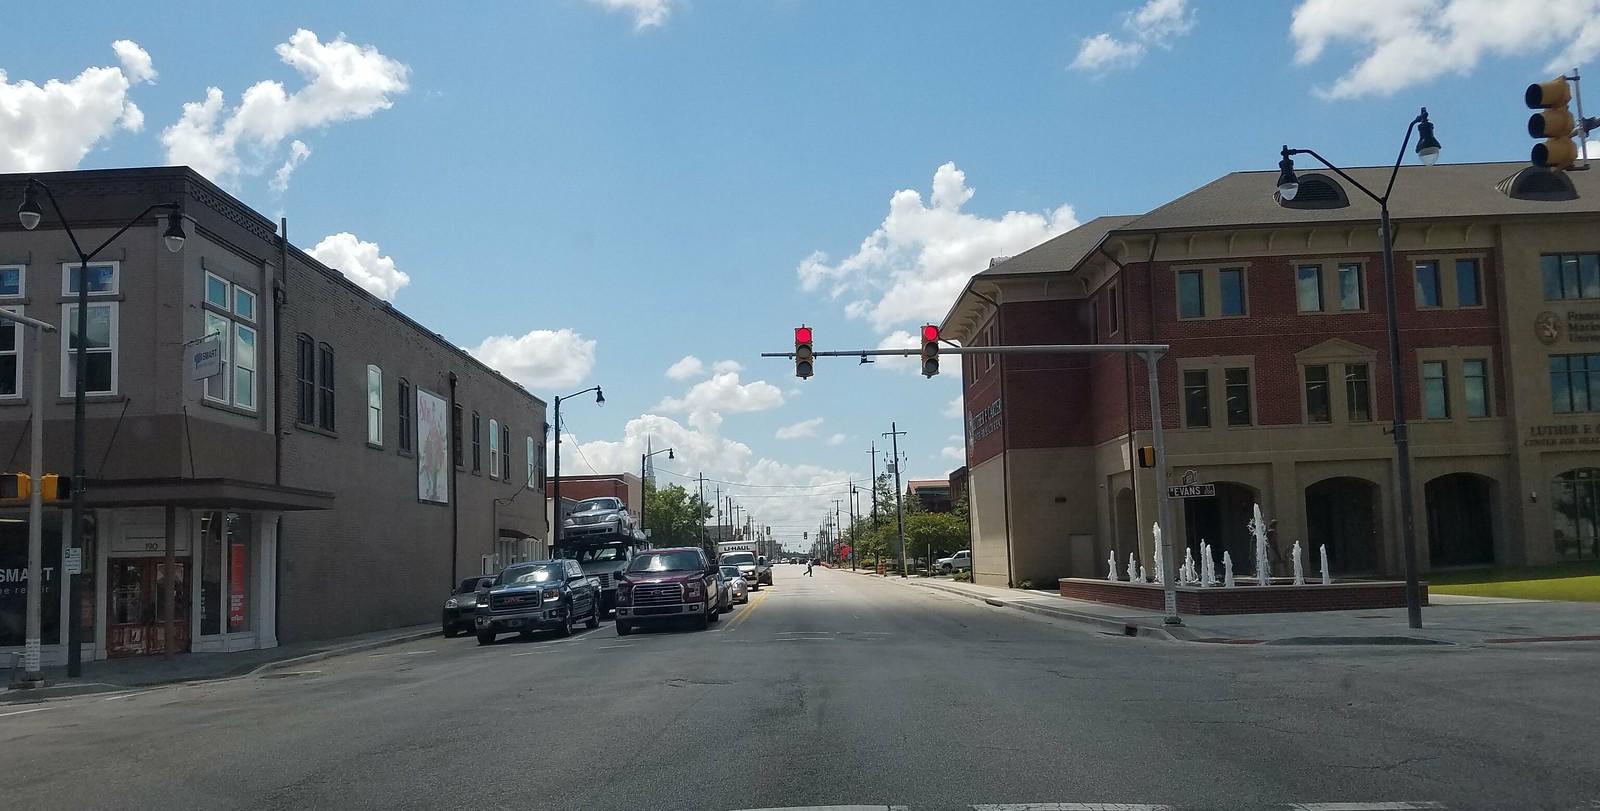 downtown florence sc is booming (Columbia, Sumter ...